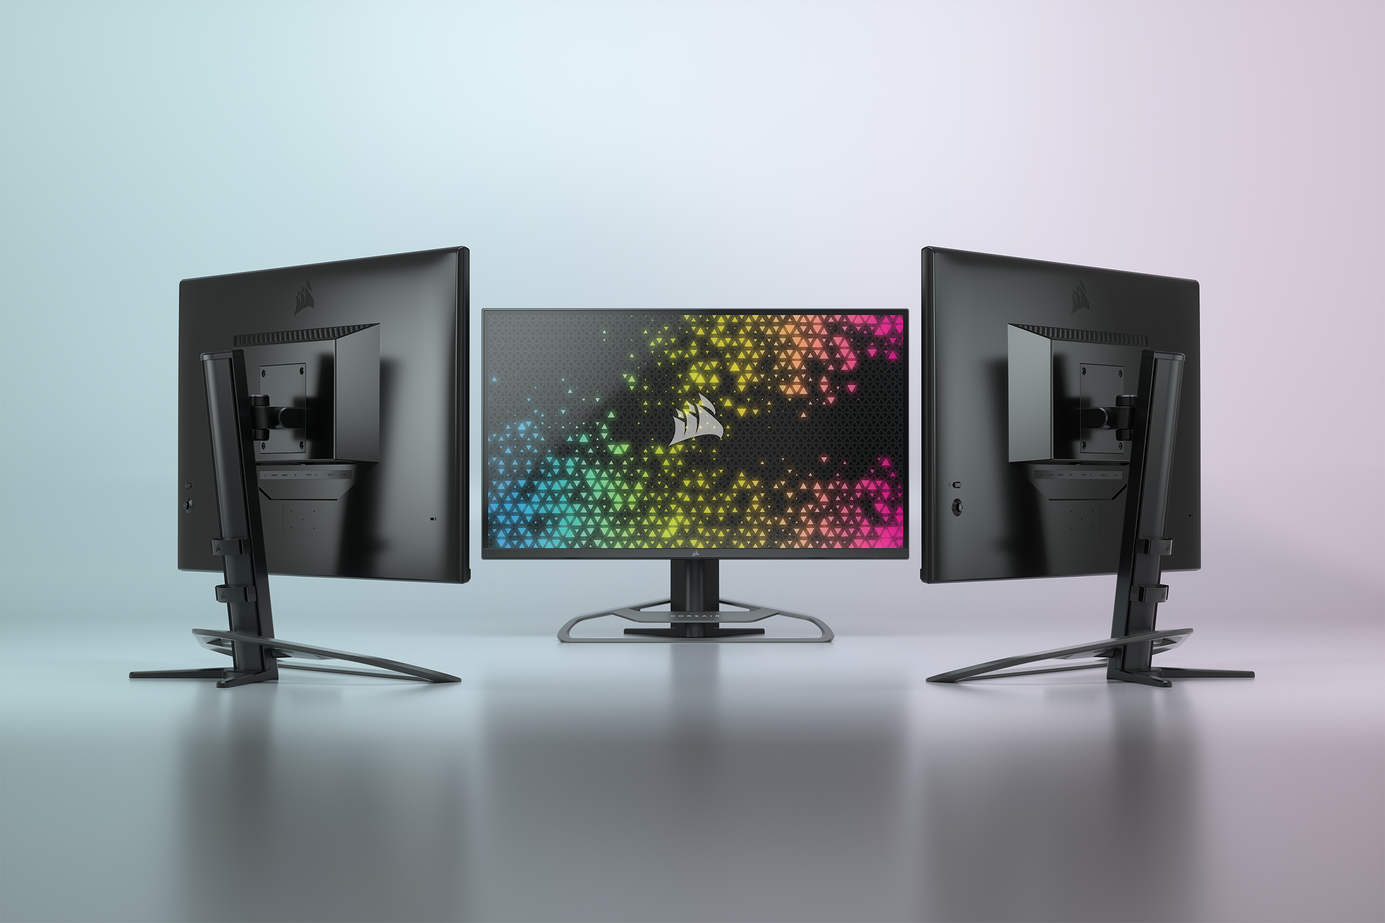 kimplante støn segment Corsair Xeneon 32QHD165: A 32-inch and 165 Hz gaming monitor with some  innovative features - NotebookCheck.net News